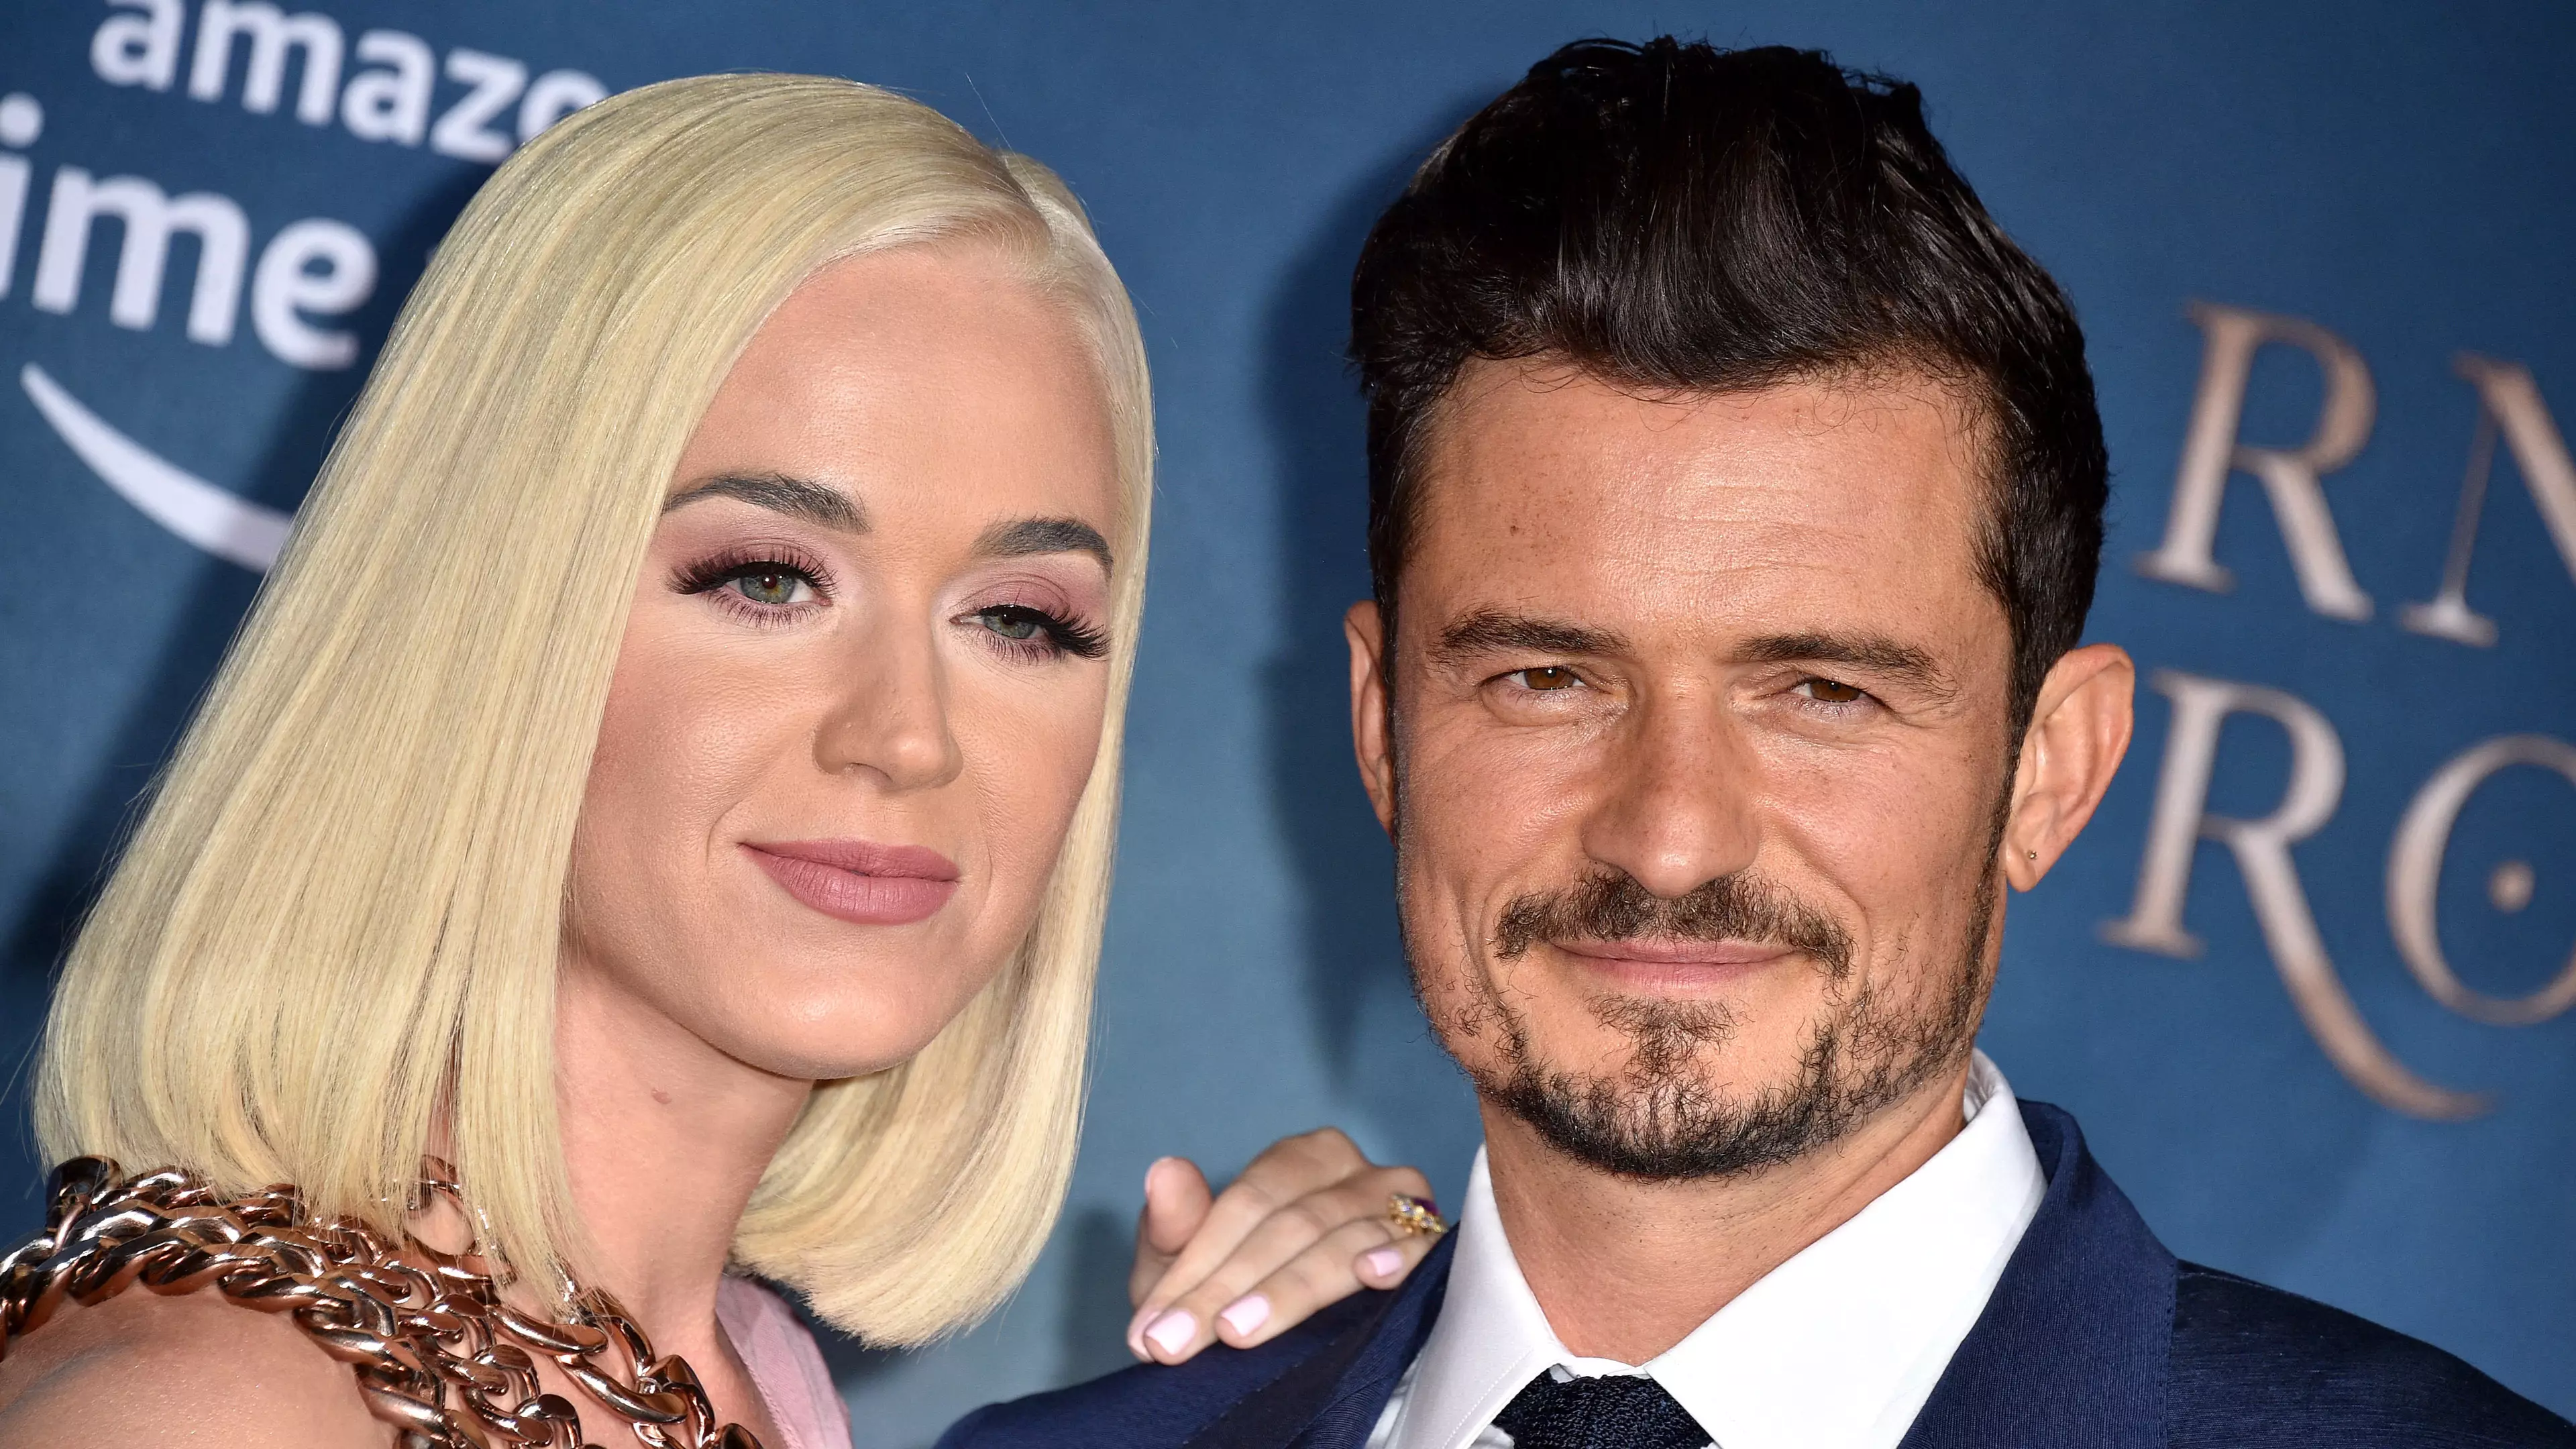 Orlando Bloom's Fans Shocked By Latest Selfie With Katy Perry